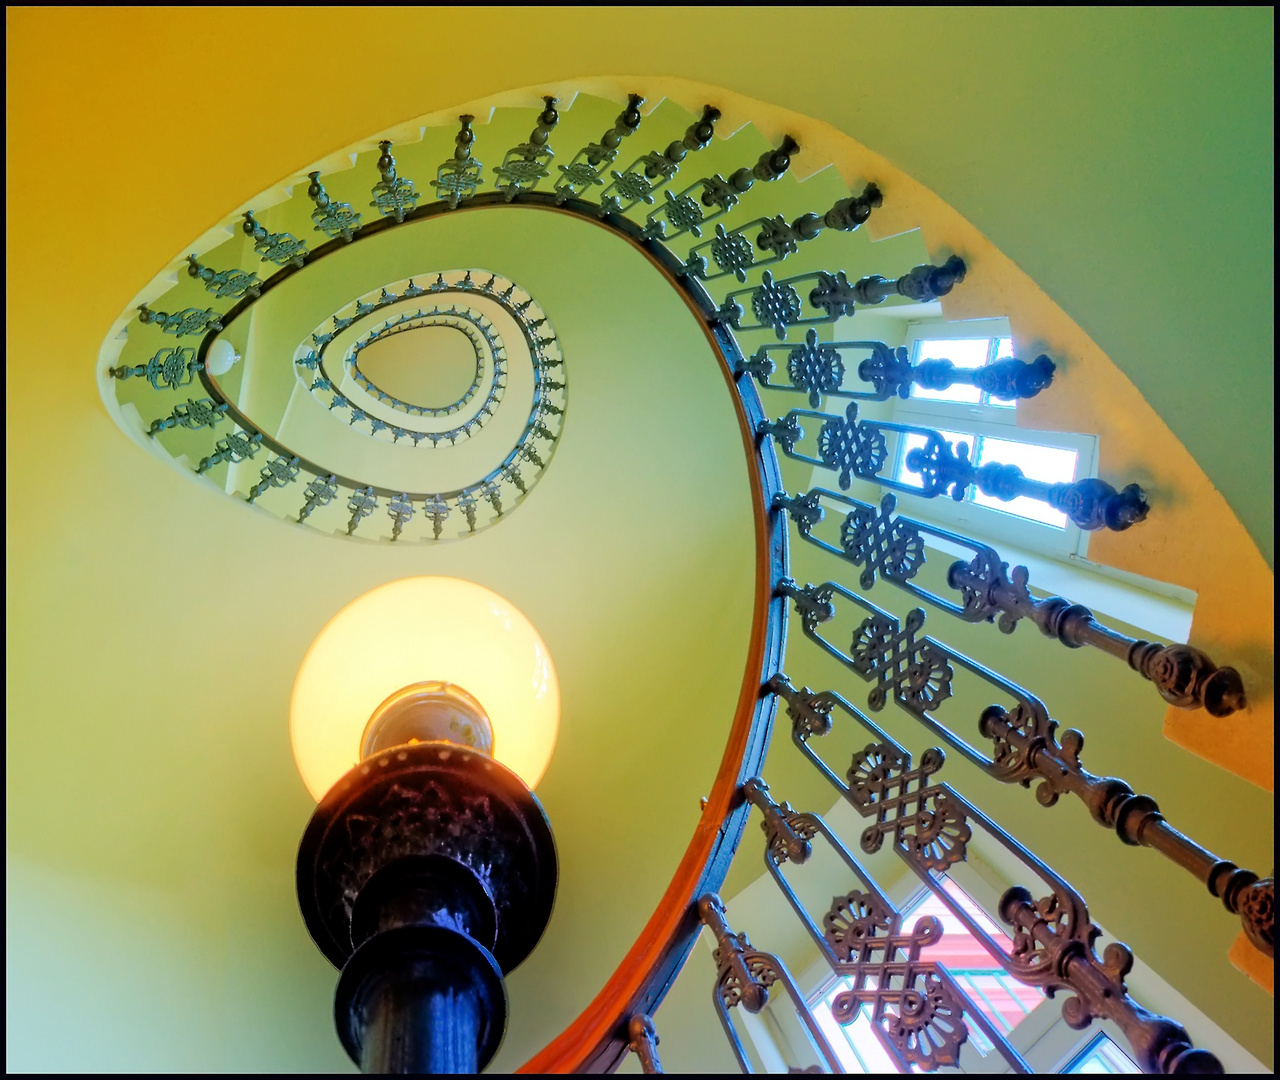 Psychedelic staircase